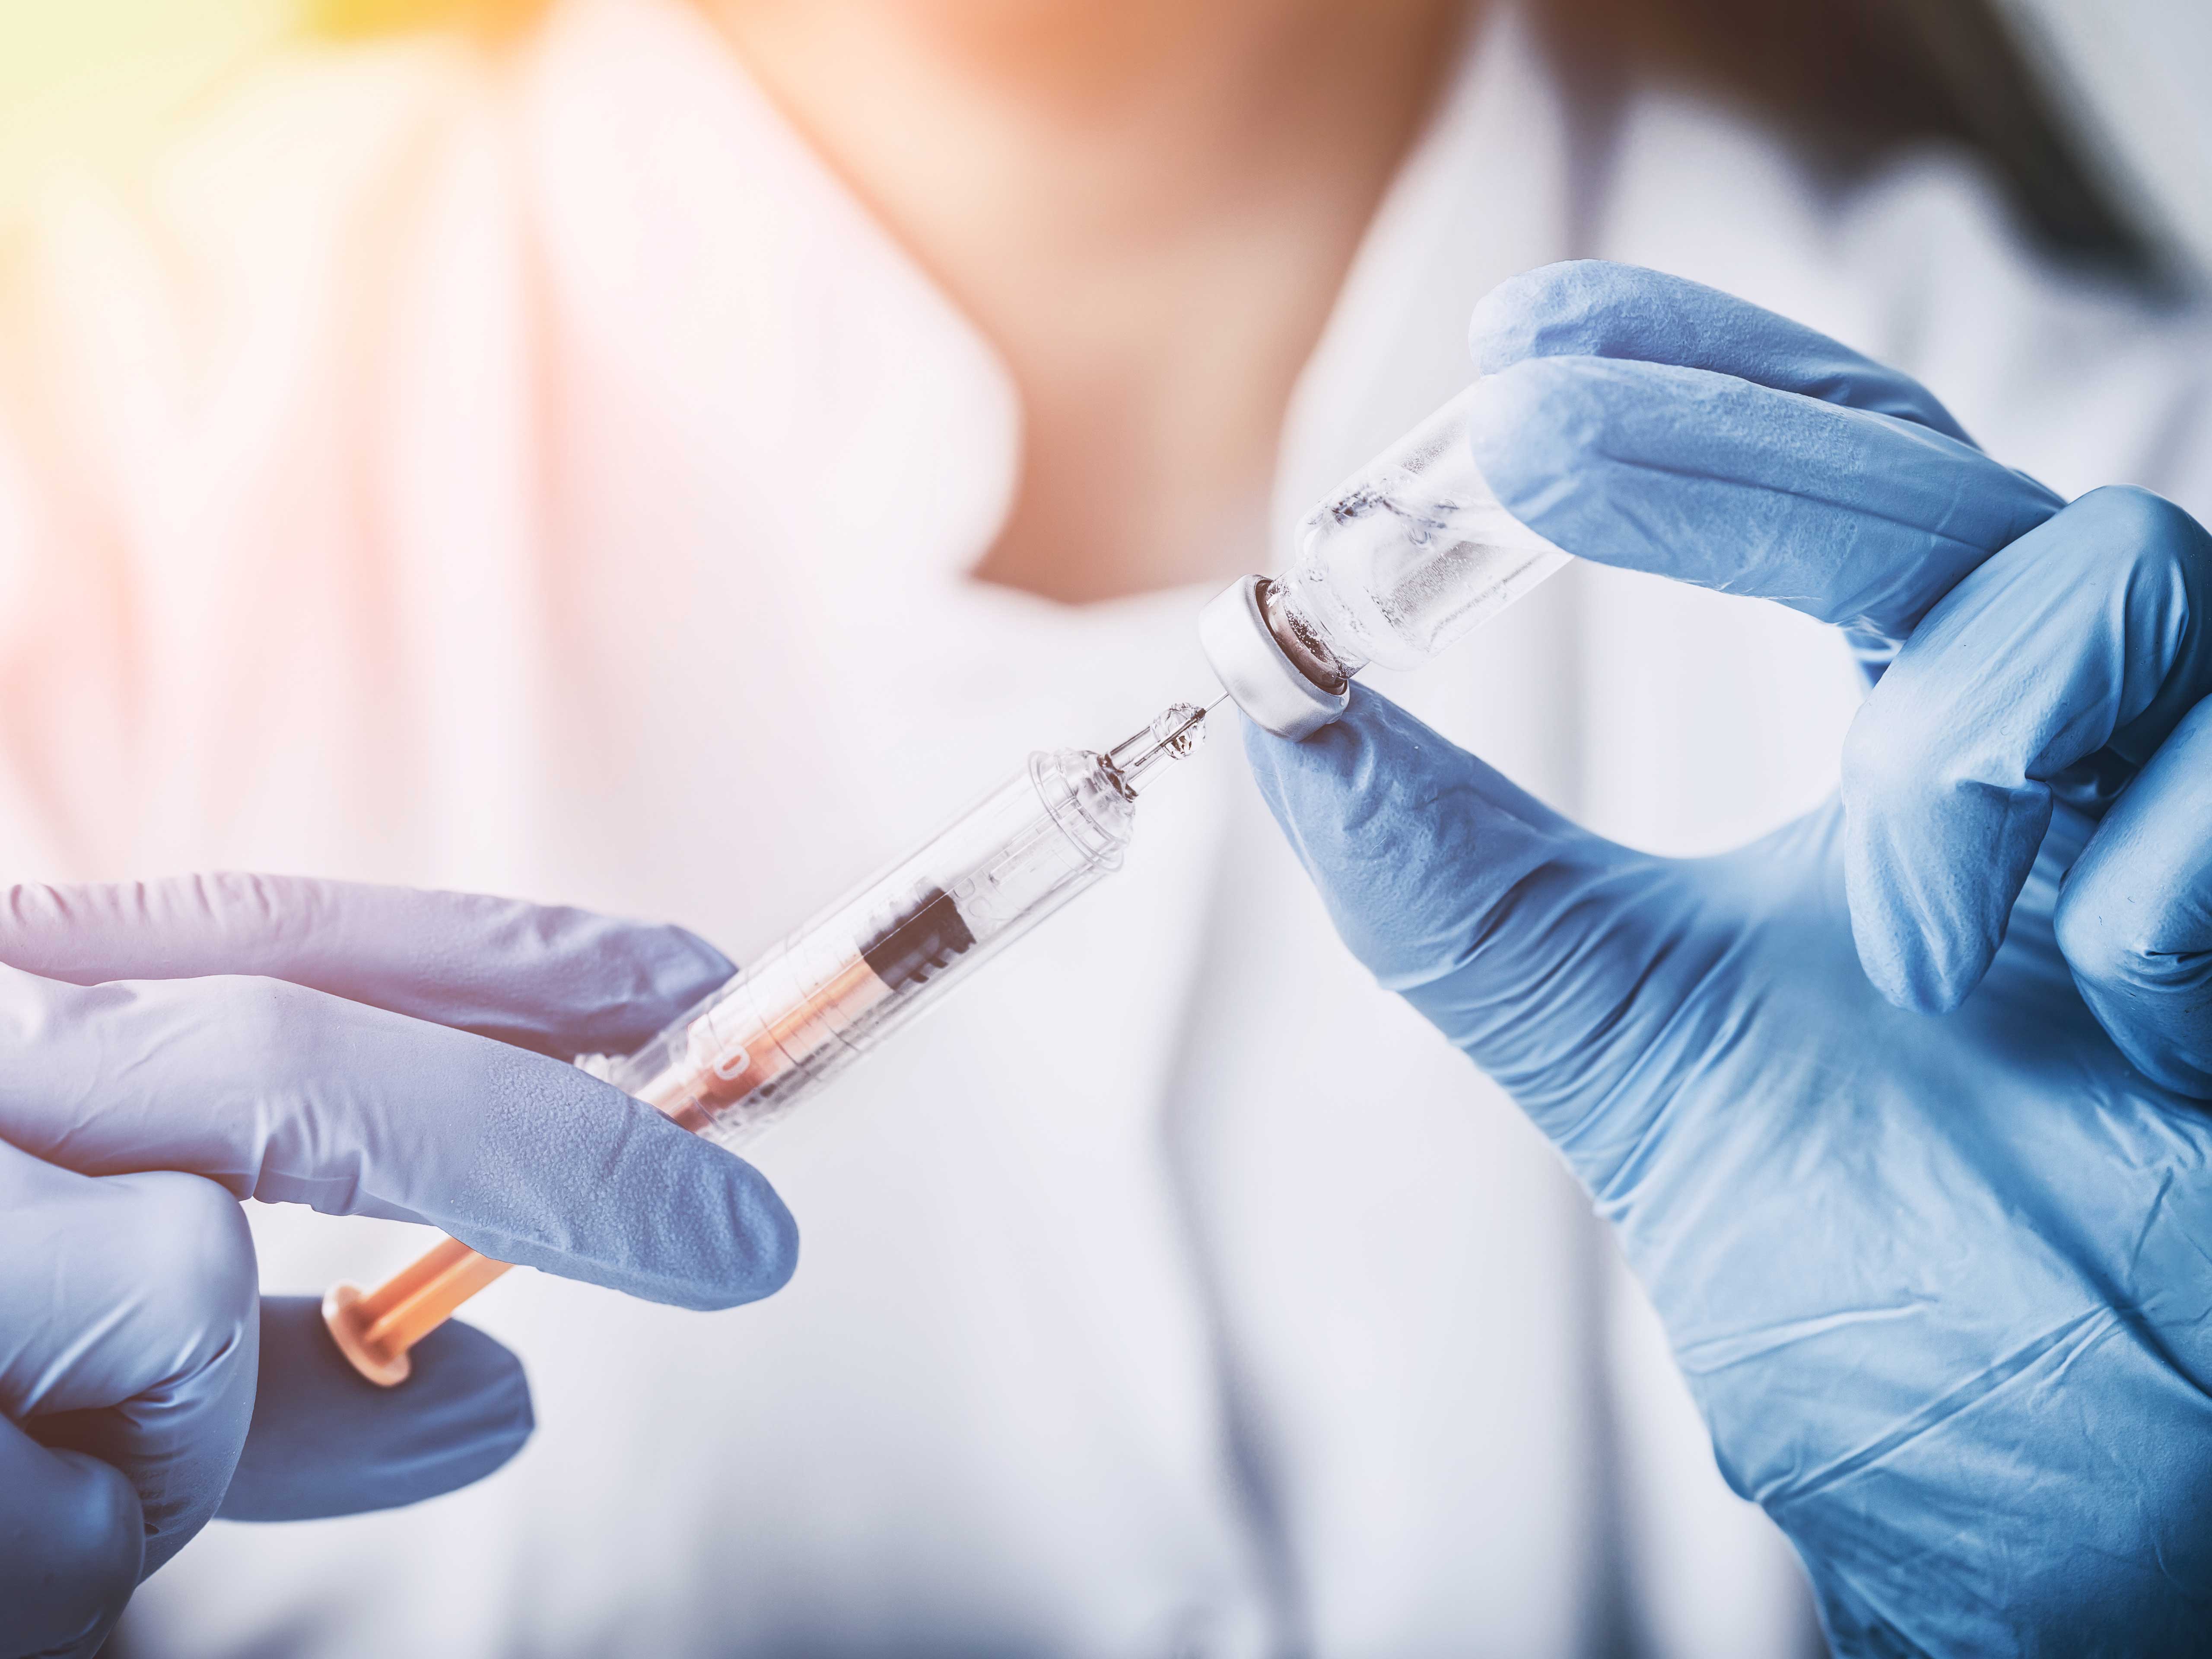 Can you mandate vaccinations in your workplace?